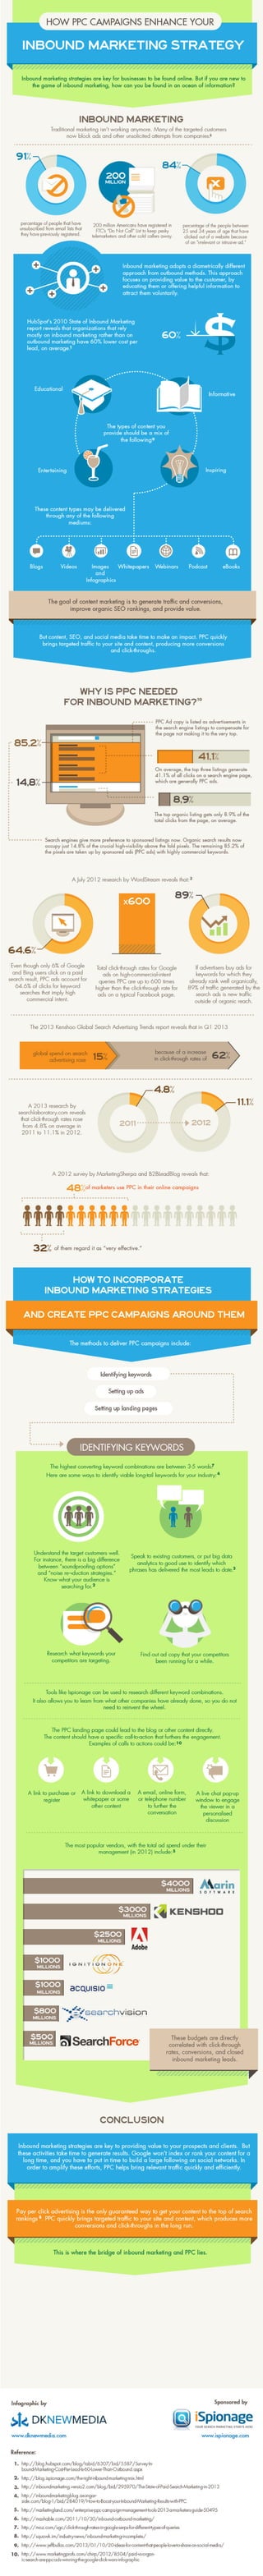 Why PPC is Important for Inbound Marketing